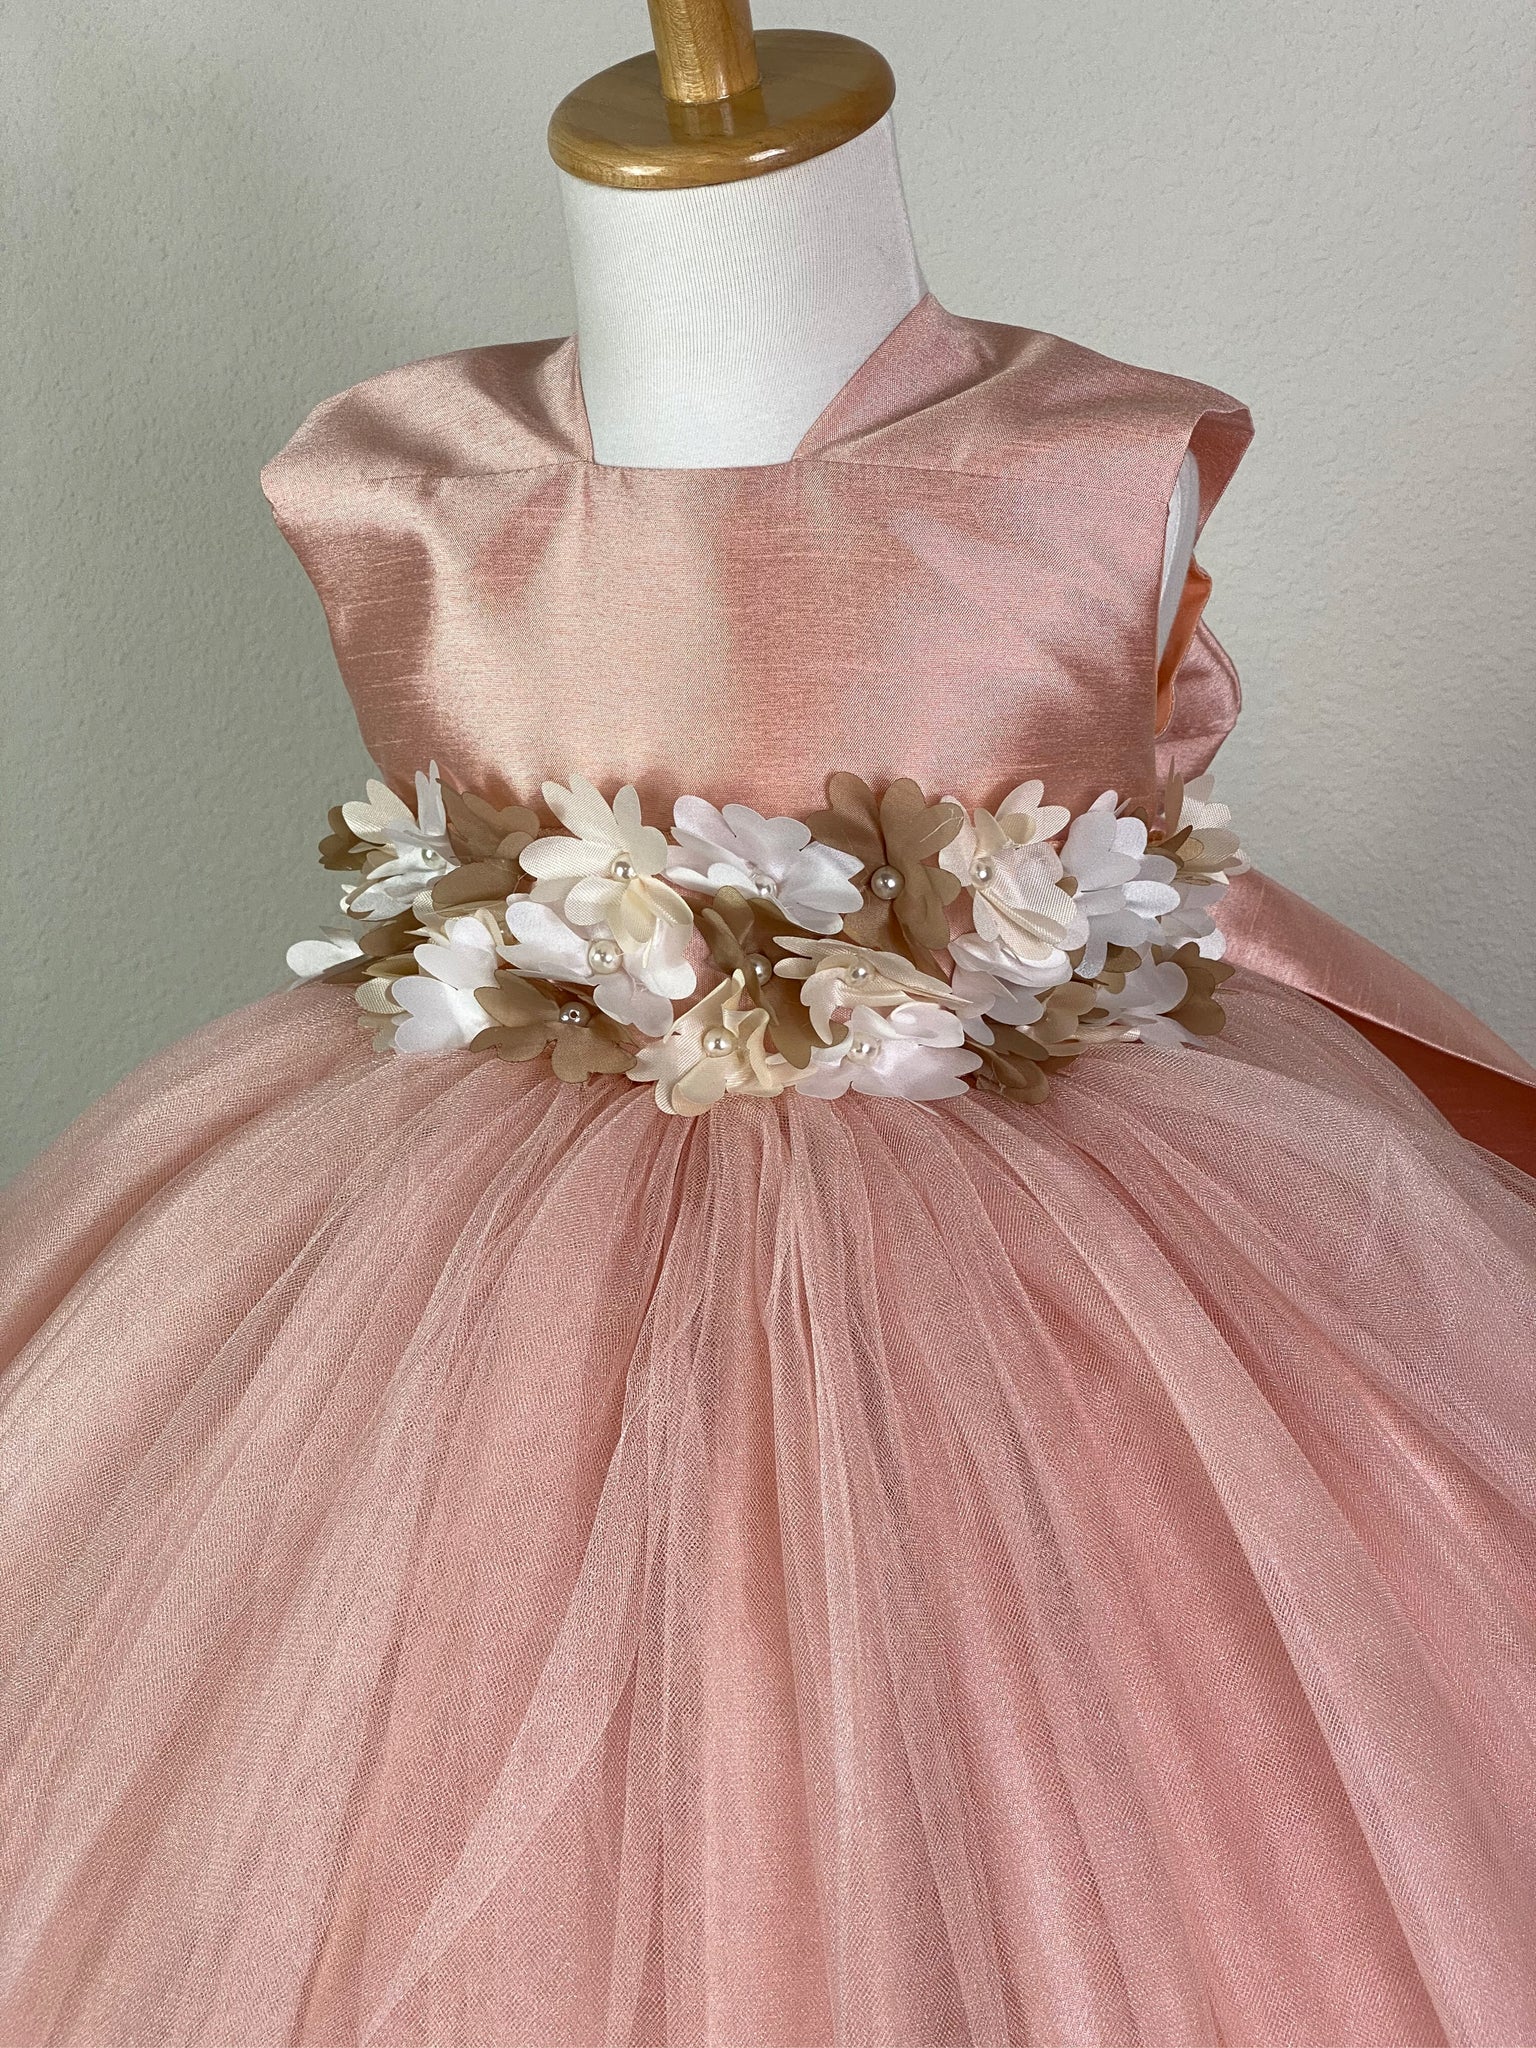 BLUSH  Blush squared neck bodice Ivory and beige flower with pearl center cummerbund Blush ruched tulle and satin skirting Button closure Large blush bow on back Dress pictured with a petticoat Petticoat not included  Choose from a tulle, cloth, or wire for best look